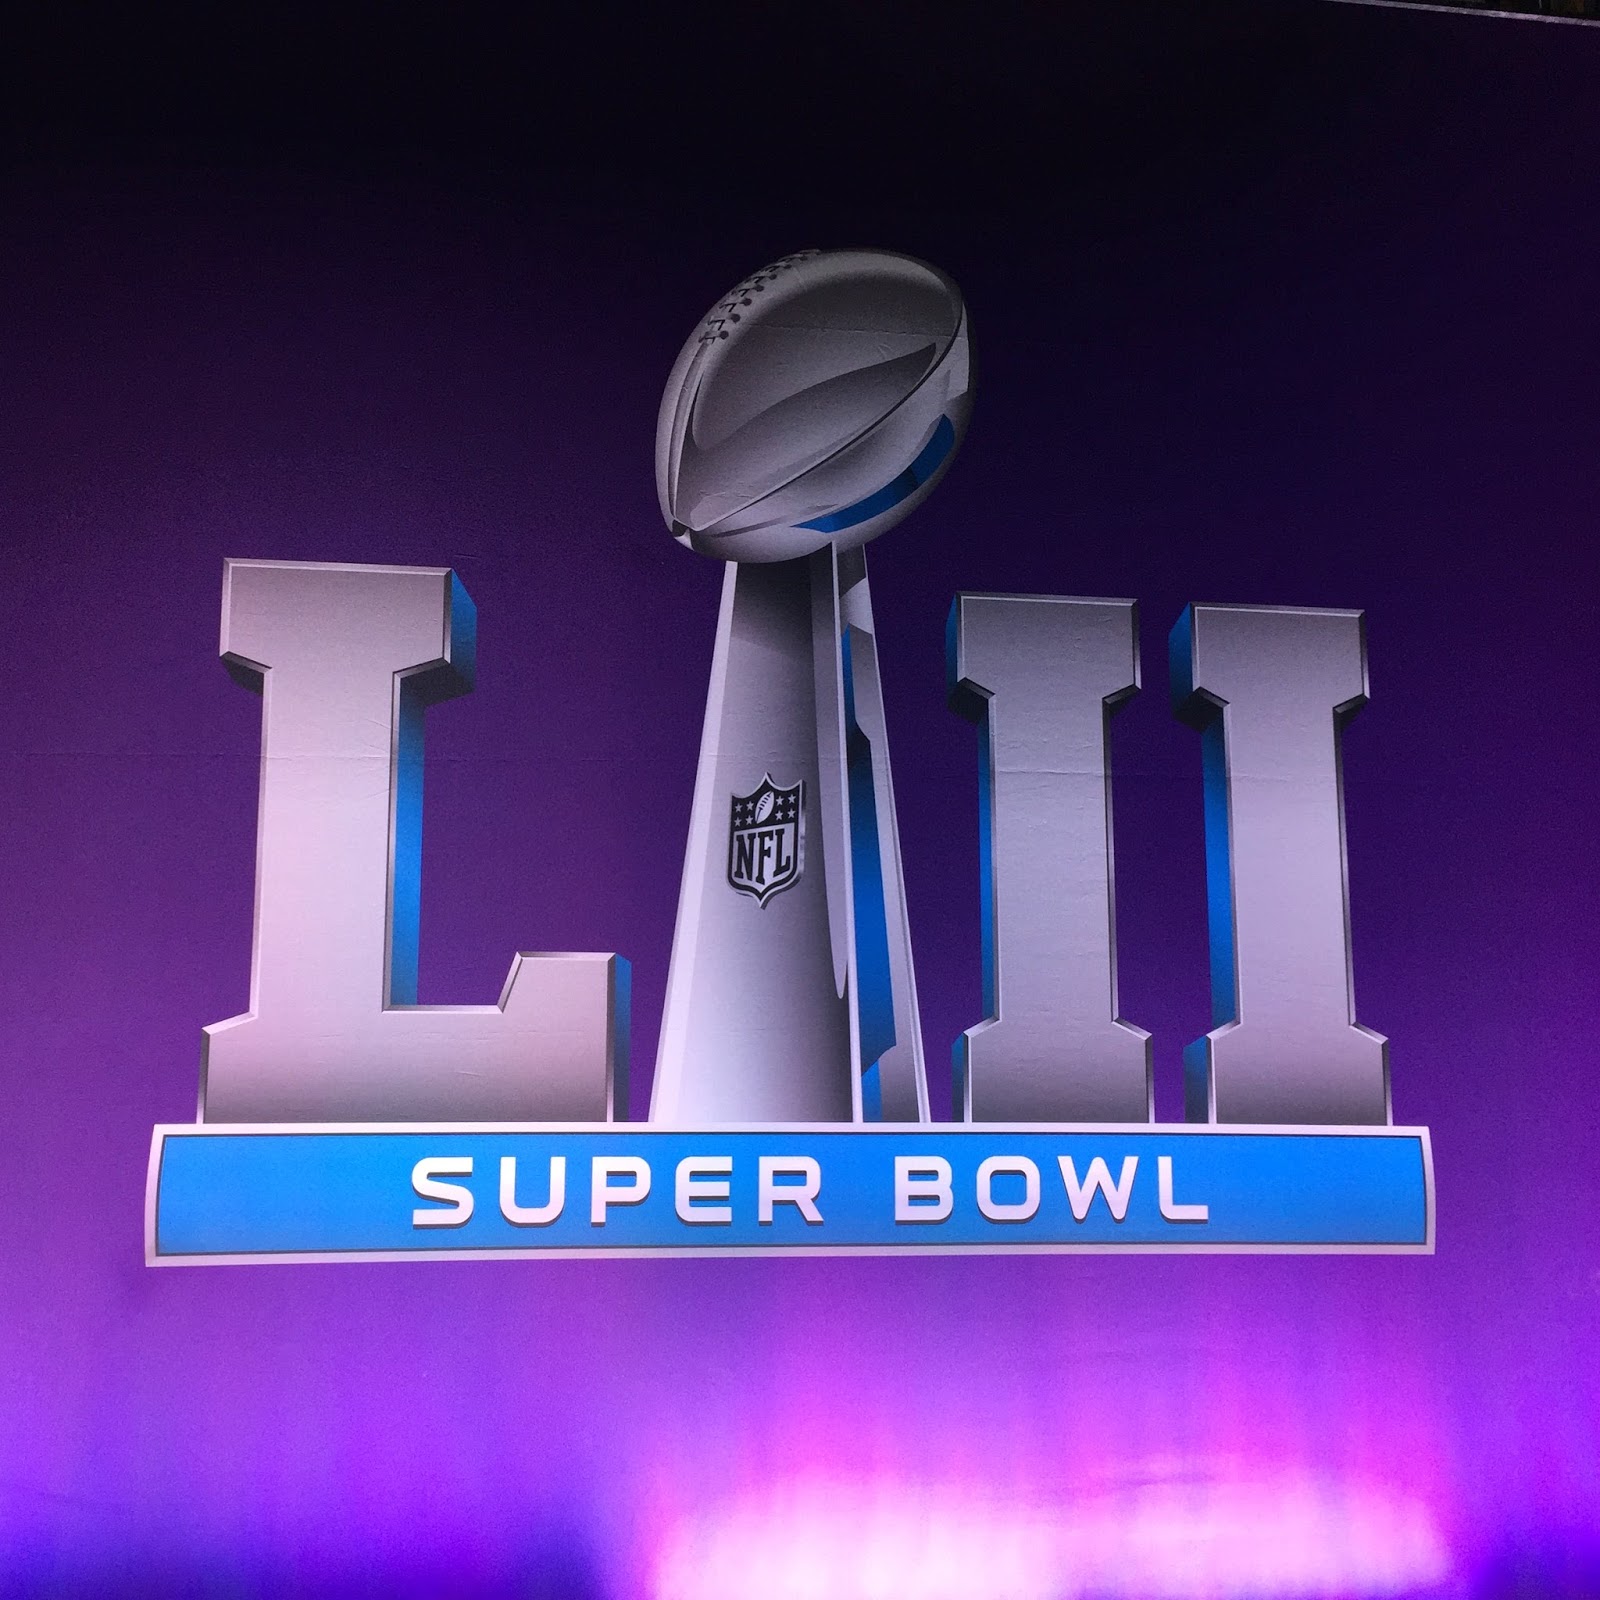 You are currently viewing Super Bowl LII in Minneapolis, Minnesota